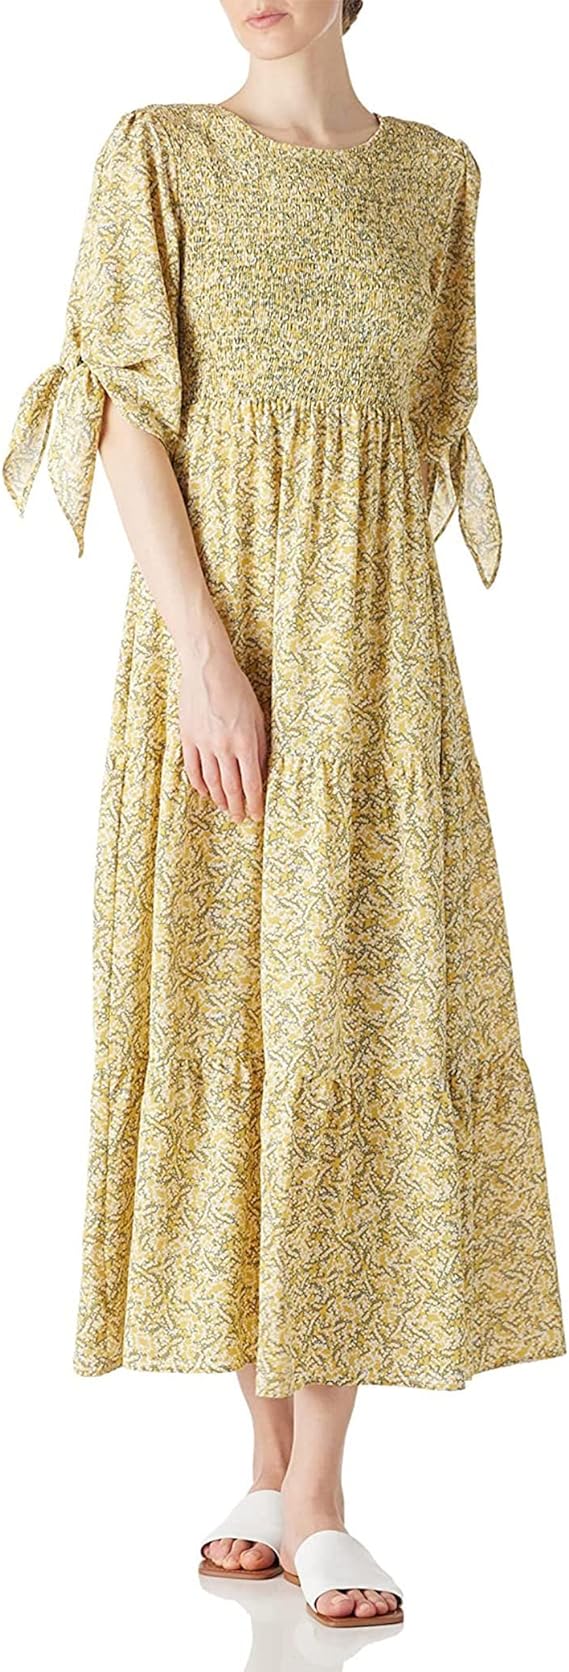 LUSMAY Women's Casual Tie 3/4 Sleeve Floral Maxi Dresses Summer Party Smocked Long Dress